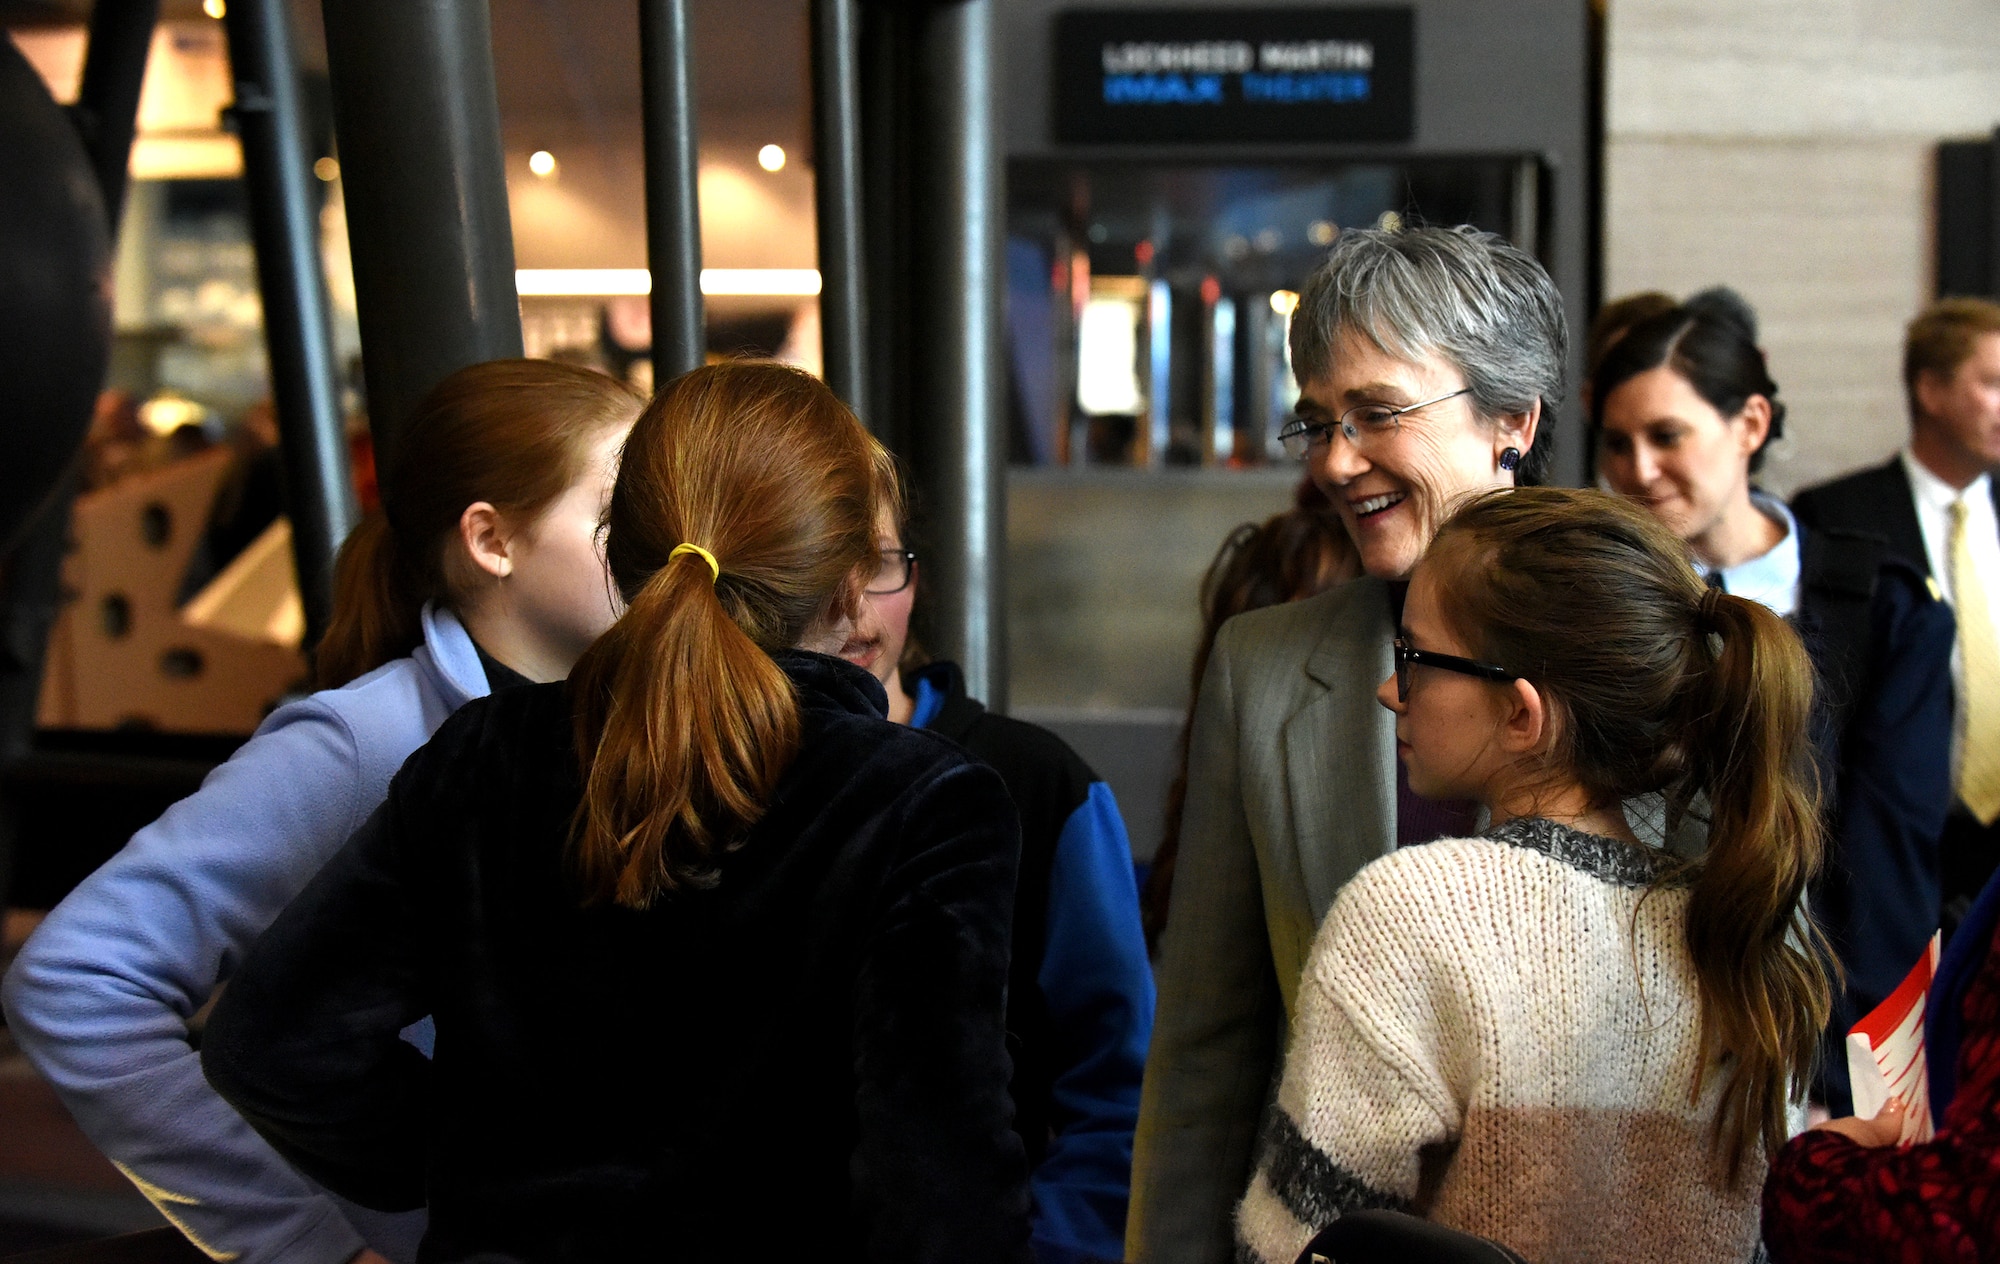 Secretary of the Air Force Heather Wilson tours the STEM demonstration prior to a screening of the movie “Captain Marvel” in Washington, D.C., March 7, 2019. The demonstration was held to inspire children to serve in the Air Force or STEM-related careers. (U.S. Air Force photo by Staff Sgt. Rusty Frank)